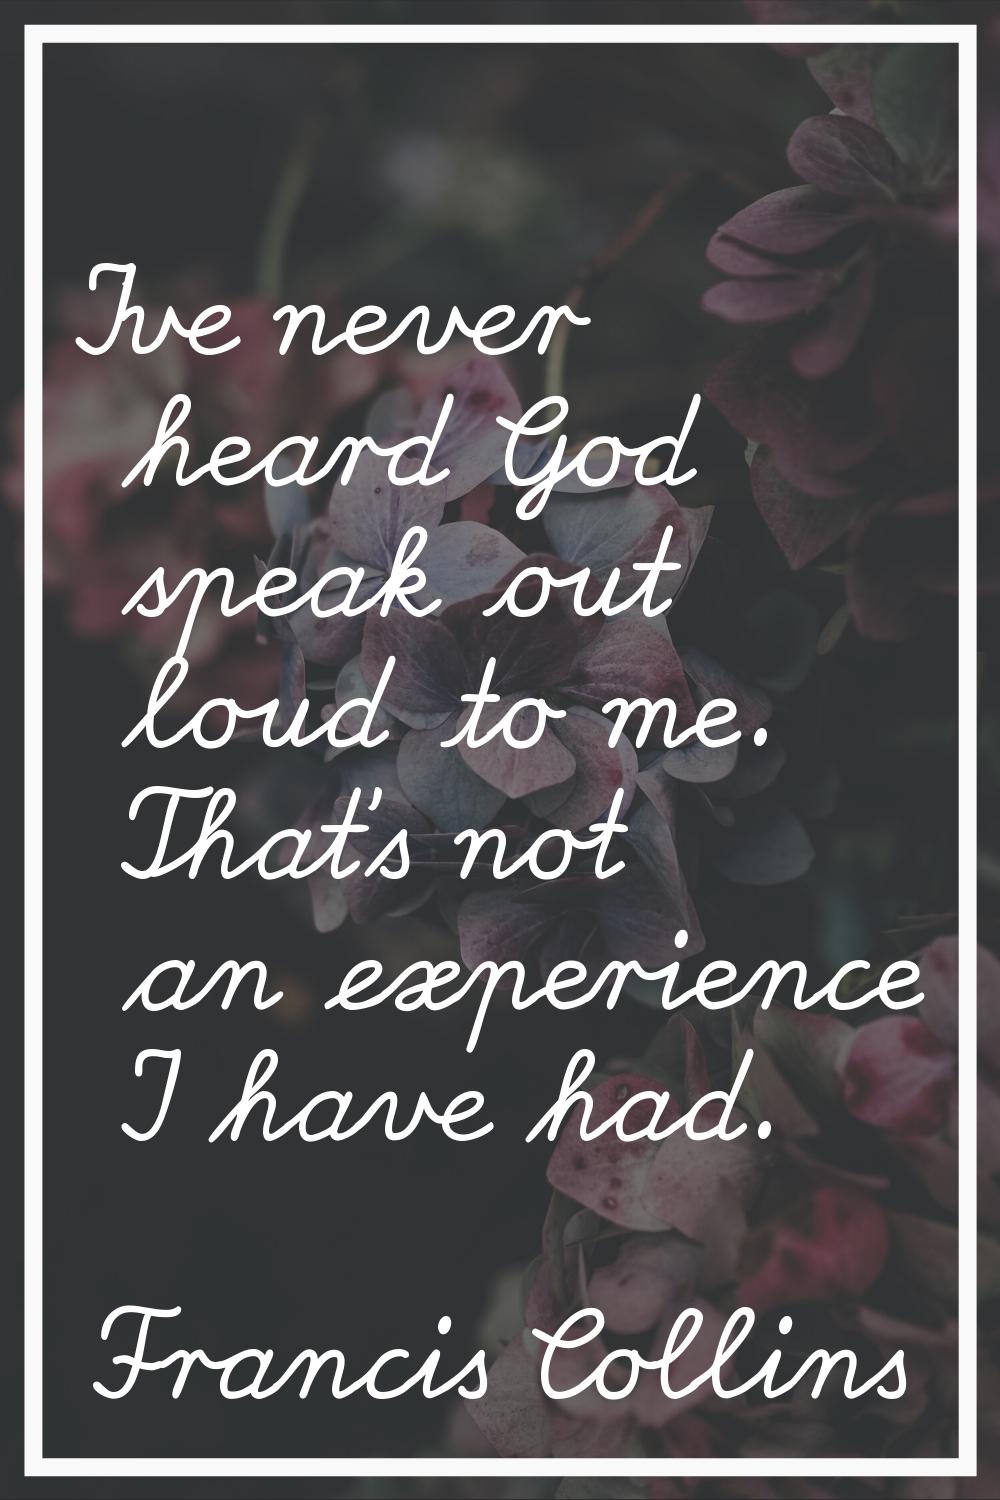 I've never heard God speak out loud to me. That's not an experience I have had.